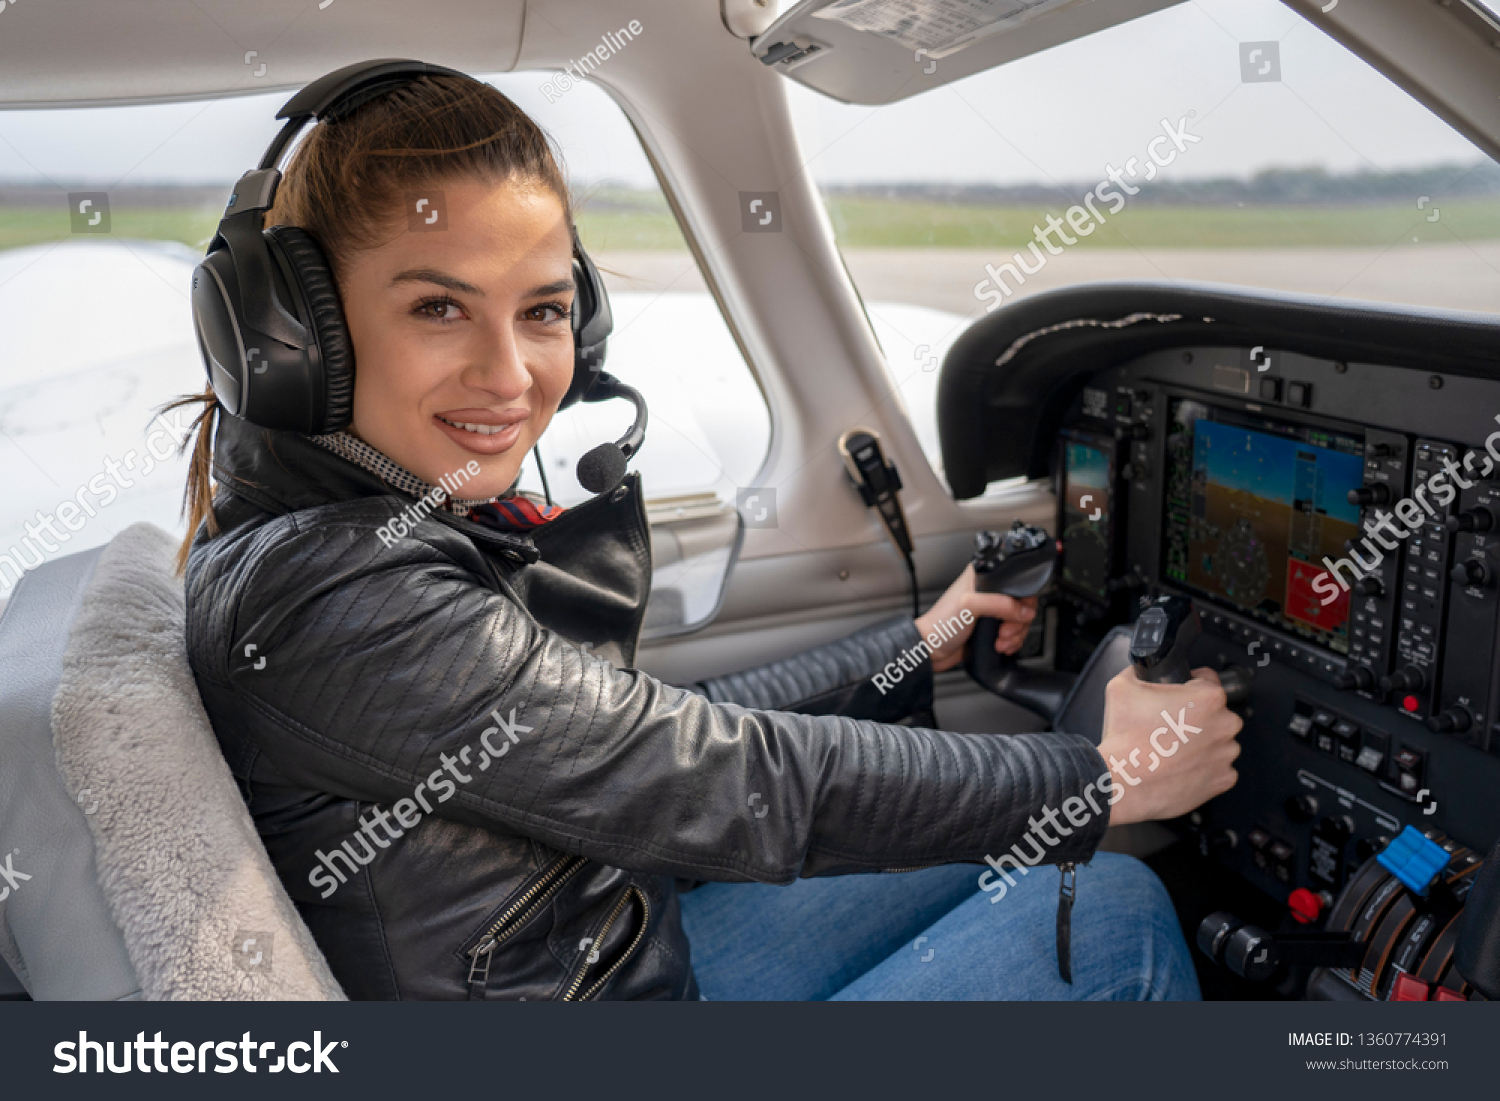 Beautiful Smiling Young Woman Pilot With Headset Sitting in Cabin of Modern Aircraft.She is Looking at Camera and Holding Steering Wheel of a Private Plane. Smiling Female Pilot in the Light Aircraft. #1360774391